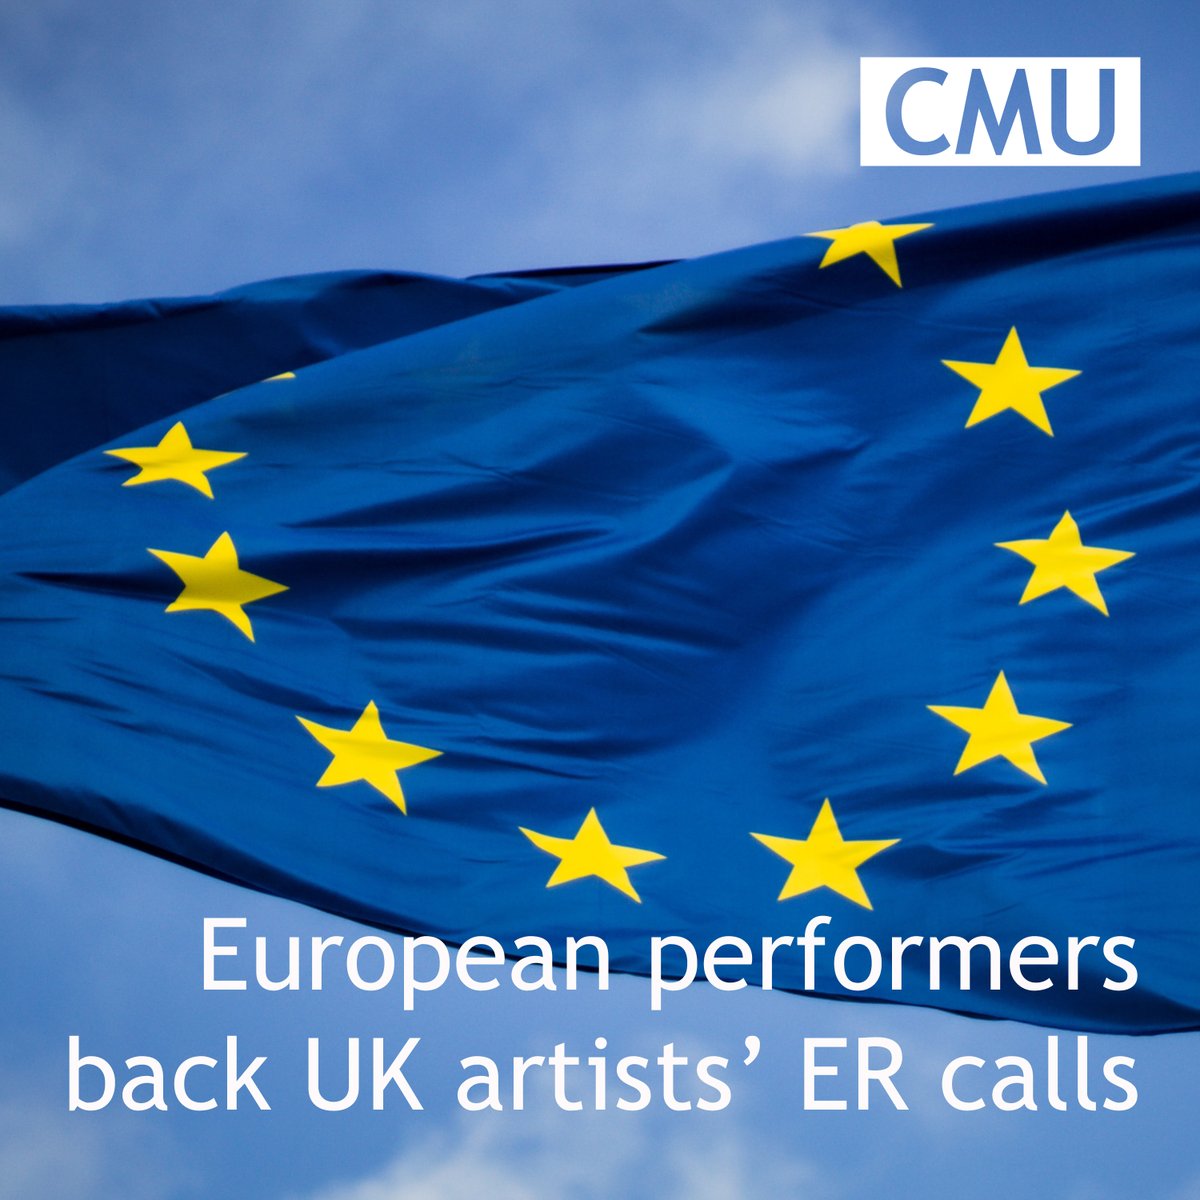 European performers back the UK artists calling for equitable remuneration on streams bit.ly/3r8Qcps

#equitableremuneration #payperformers